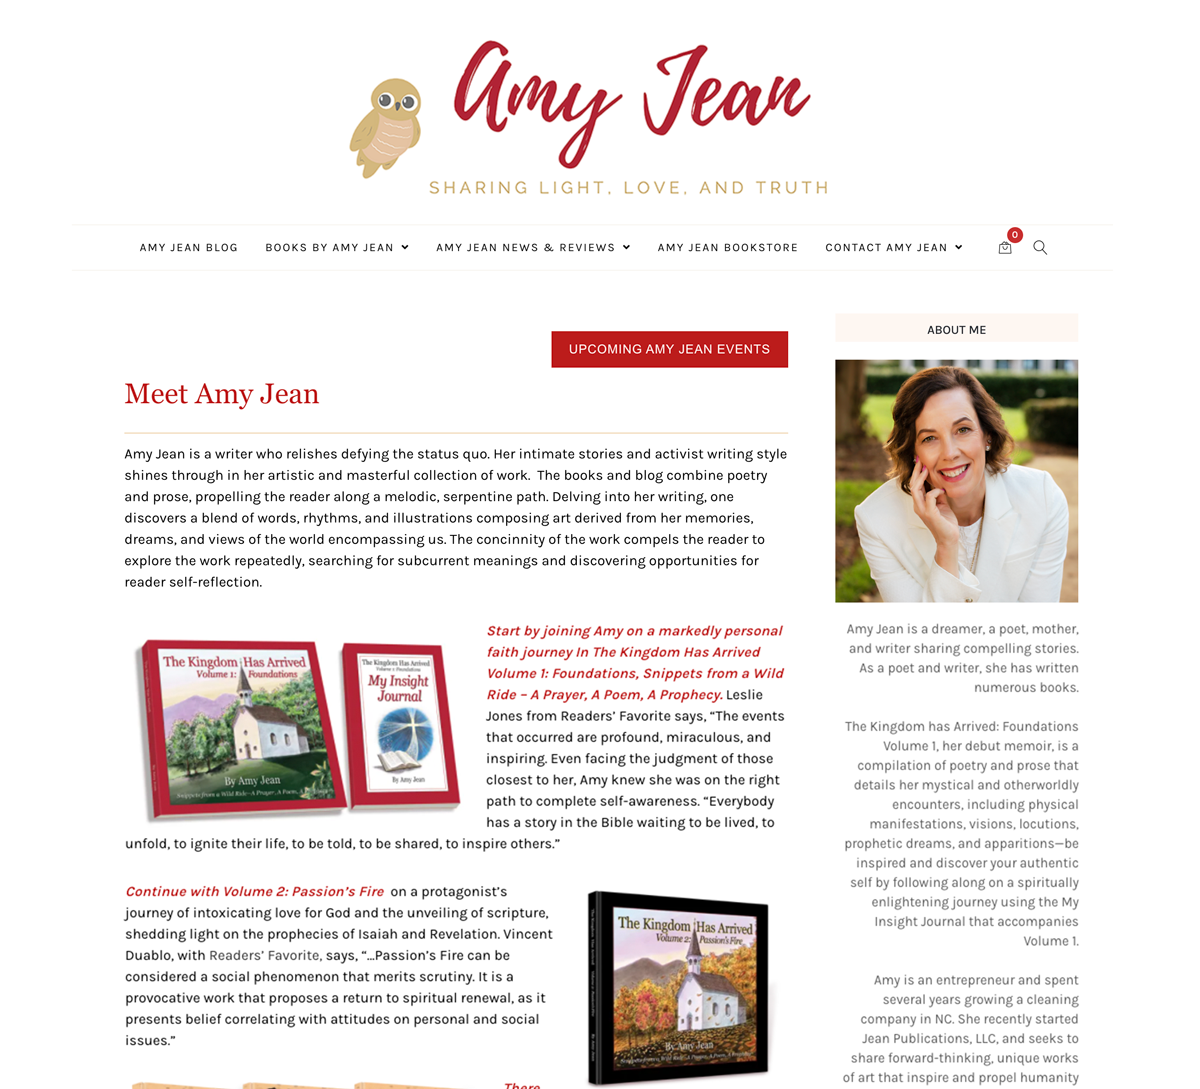 Web Design, Book Design and Illustrations for Author Amy Jean by Eric Savage of Savage Creative